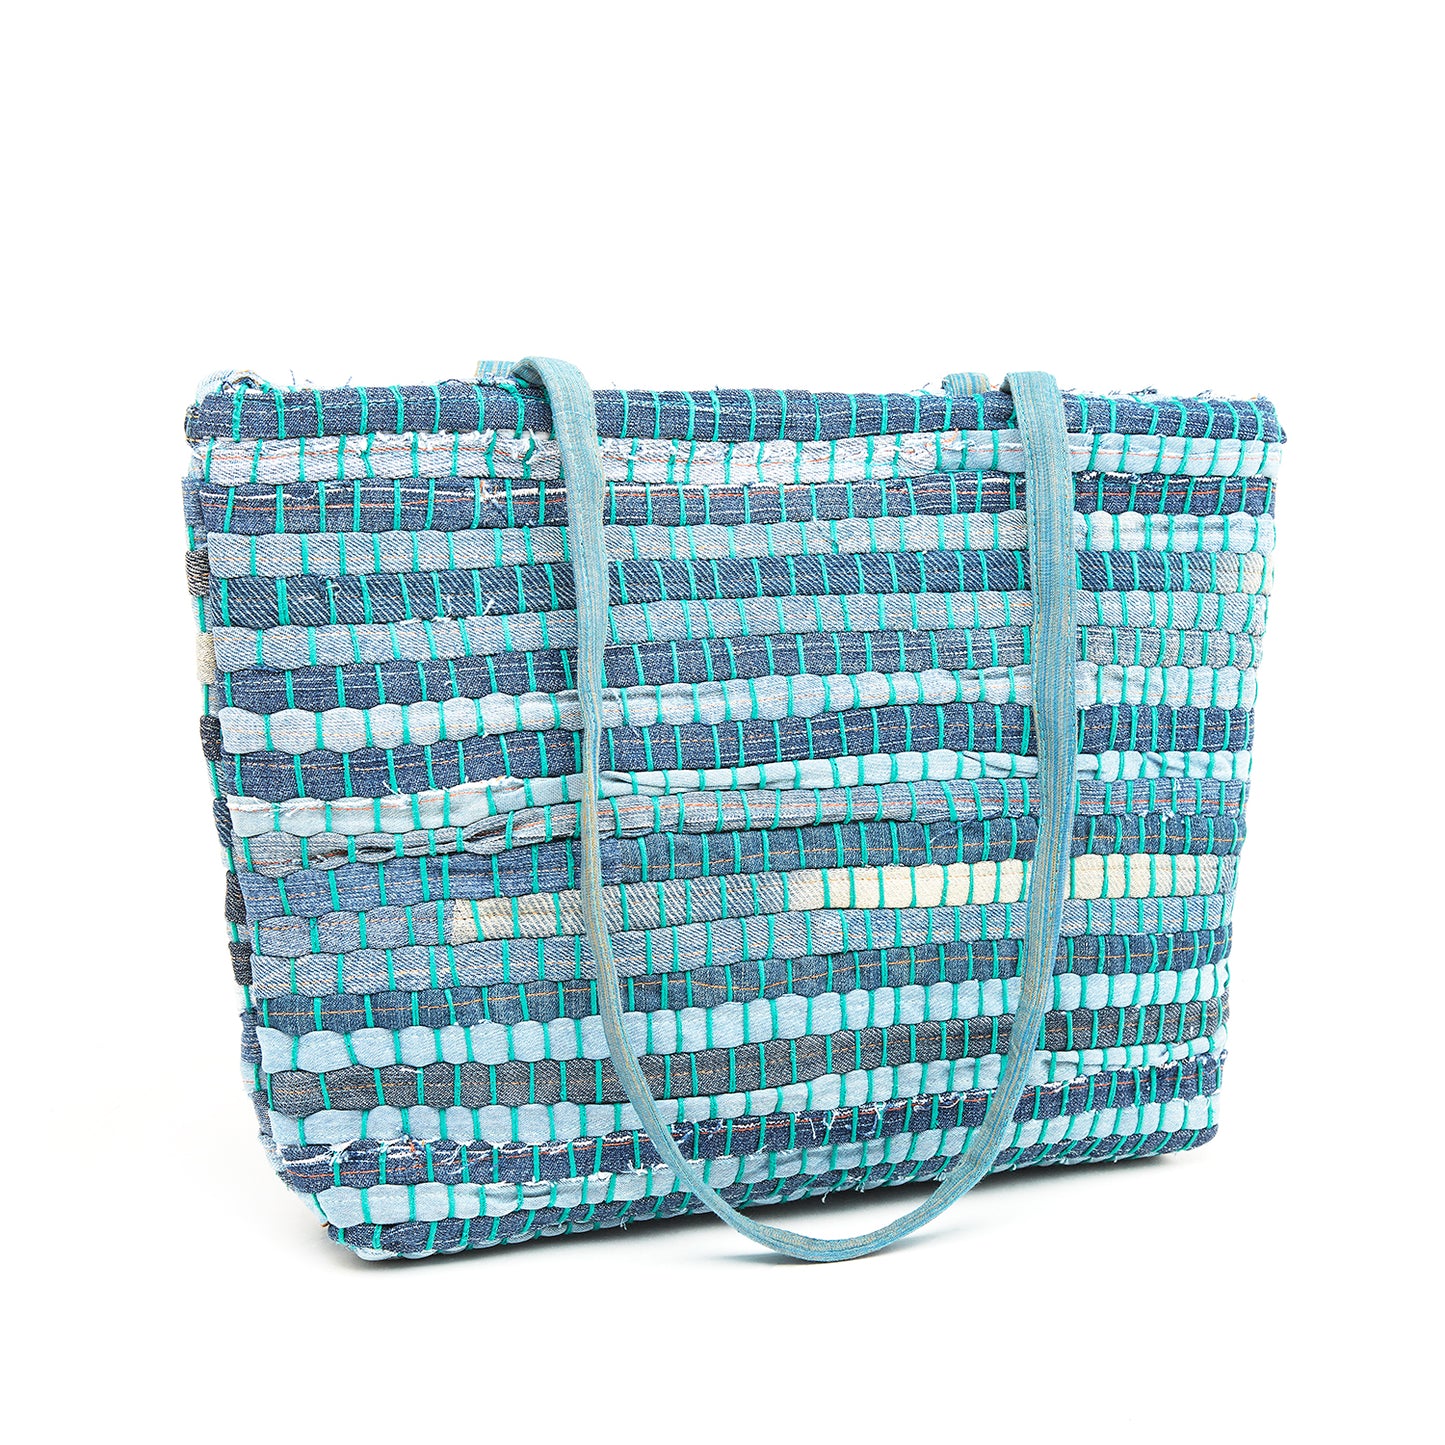 Aegean Blue & Stone Blue Colored Recycled Fabric Bag